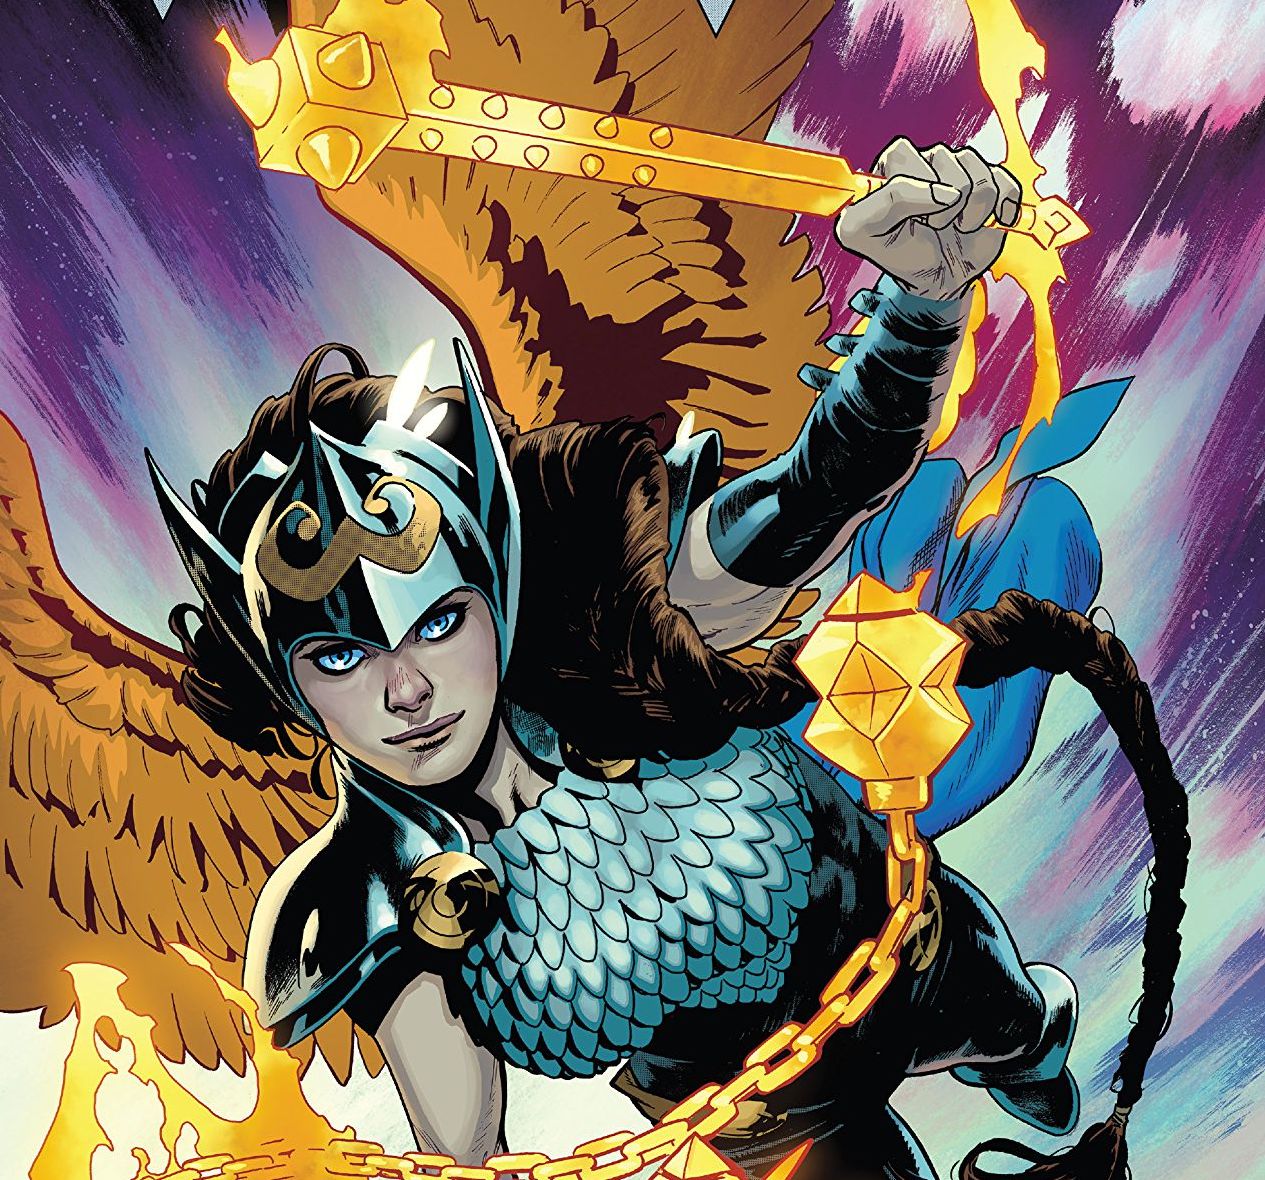 Valkyrie #1 review